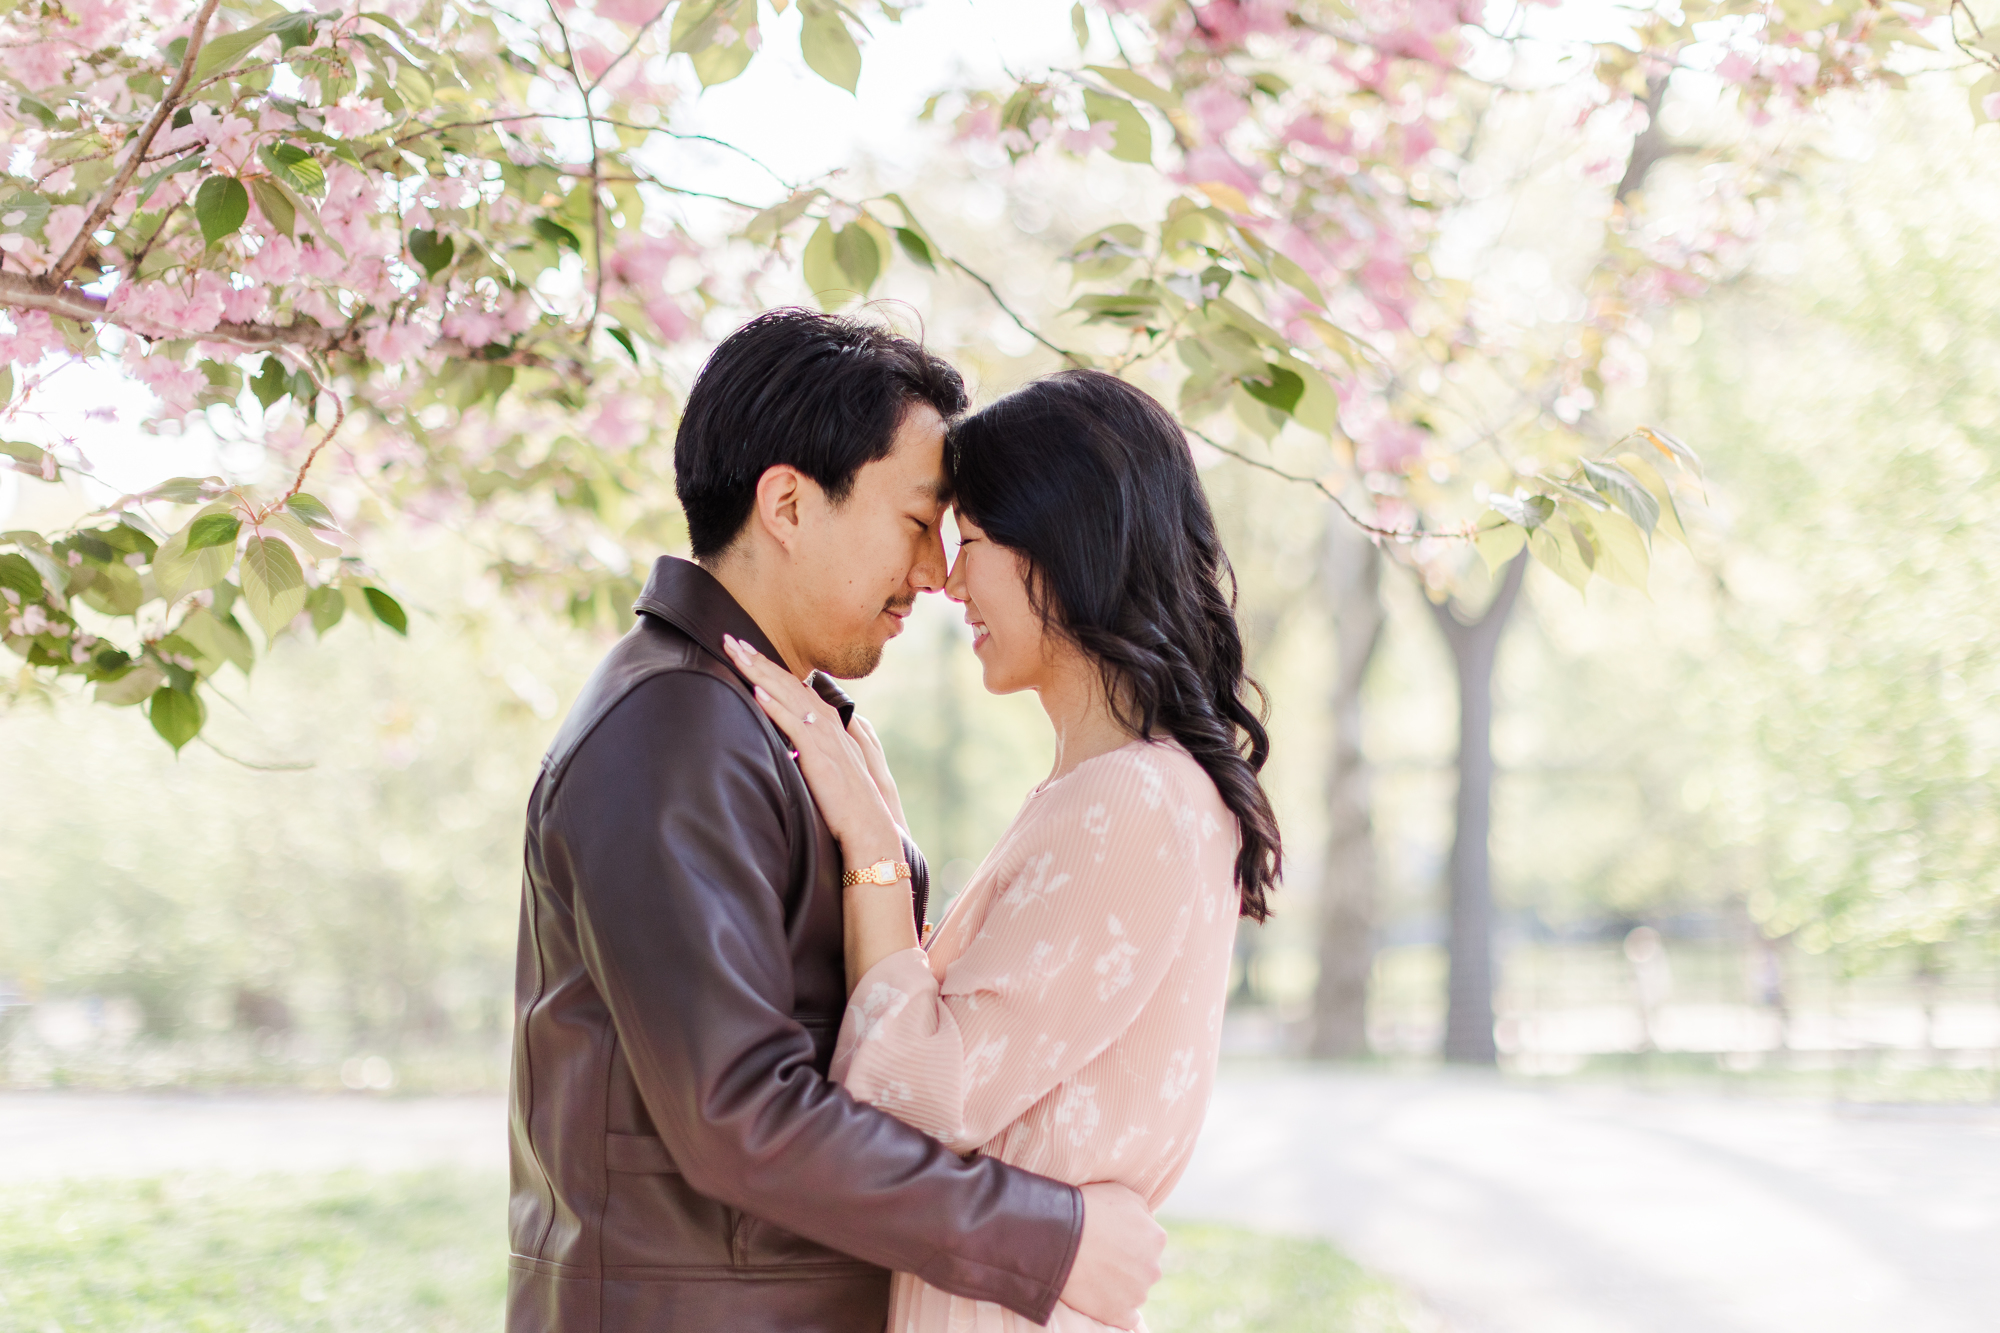 Sweet Engagement Photos With Cherry Blossoms in NYC